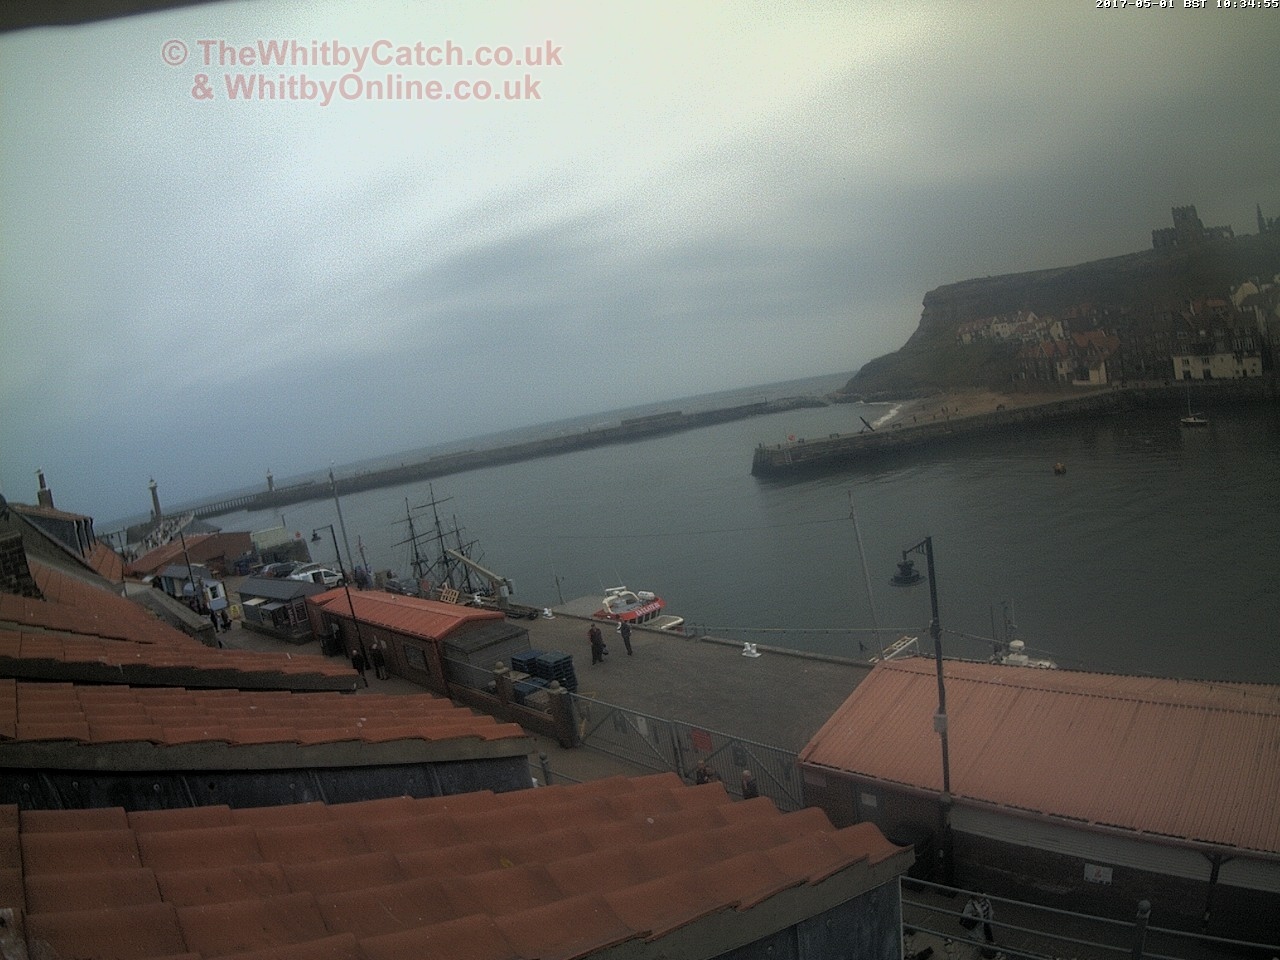 Whitby Mon 1st May 2017 10:35.